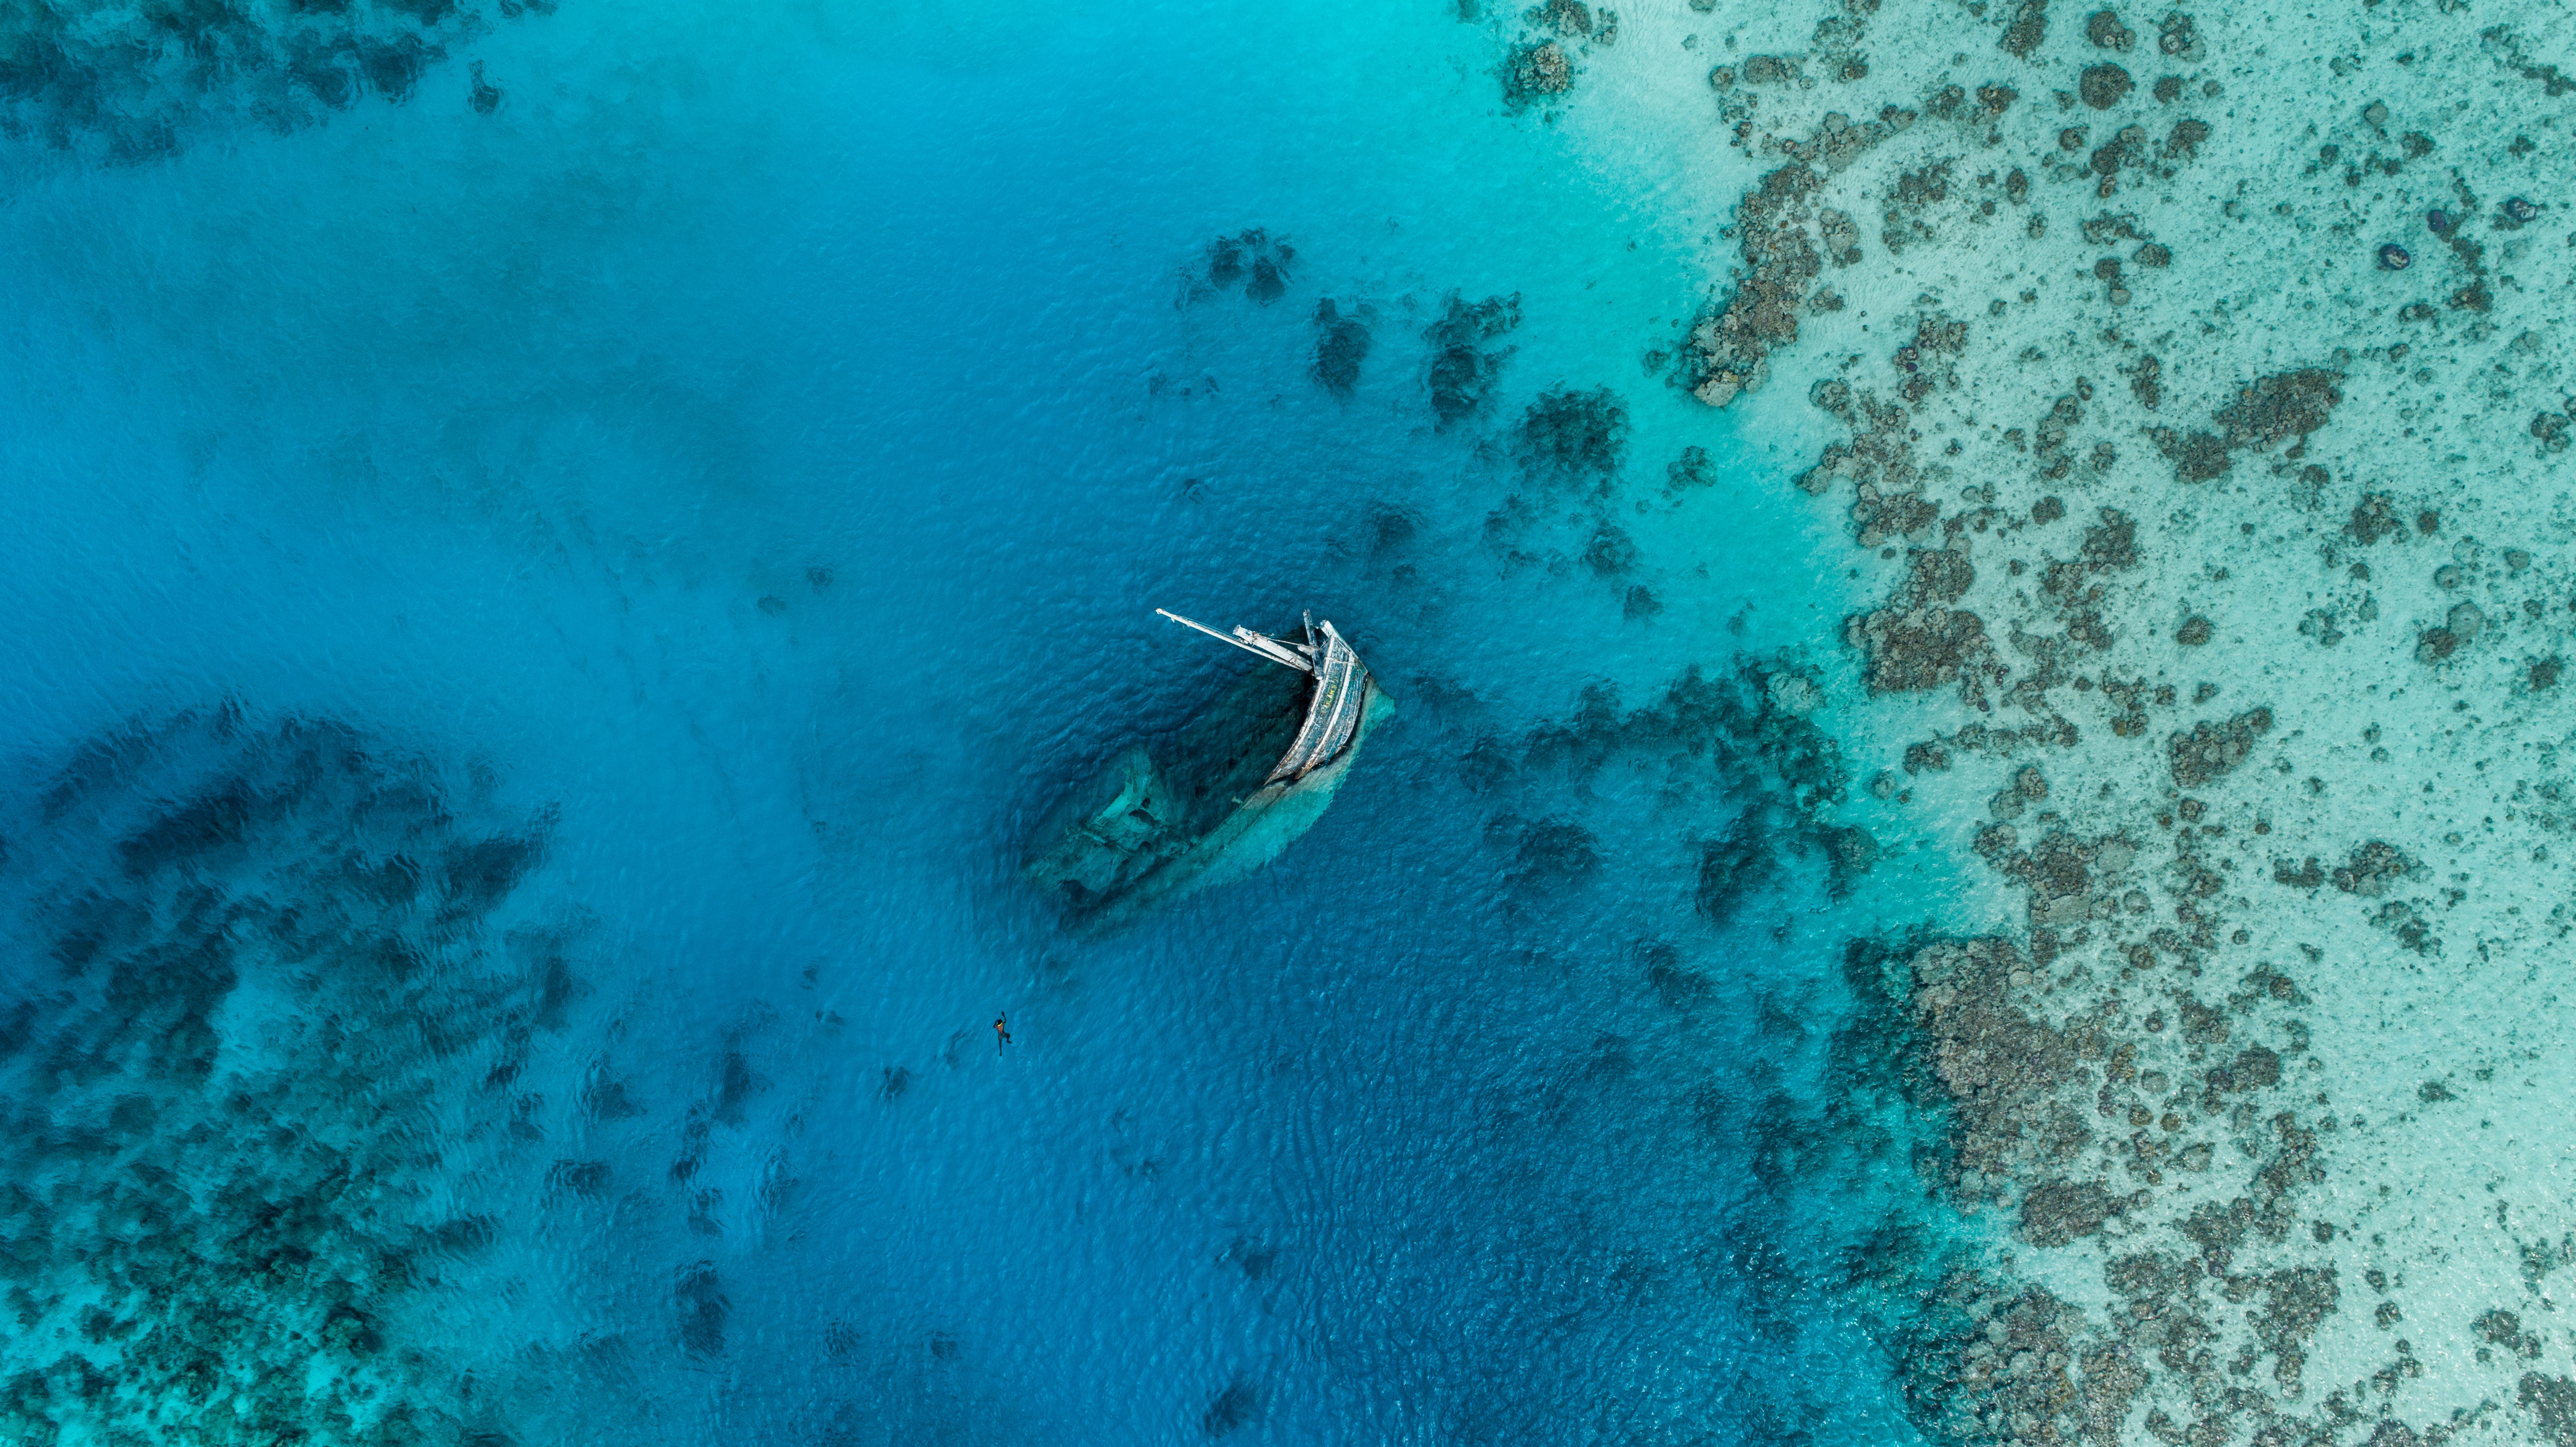 An aerial shot looking down at beautiful clear blue-green waters. In the centre of the photograph is a shipwreck - one end of the ship poking out above the water. You can just make out a person swimming towards it.